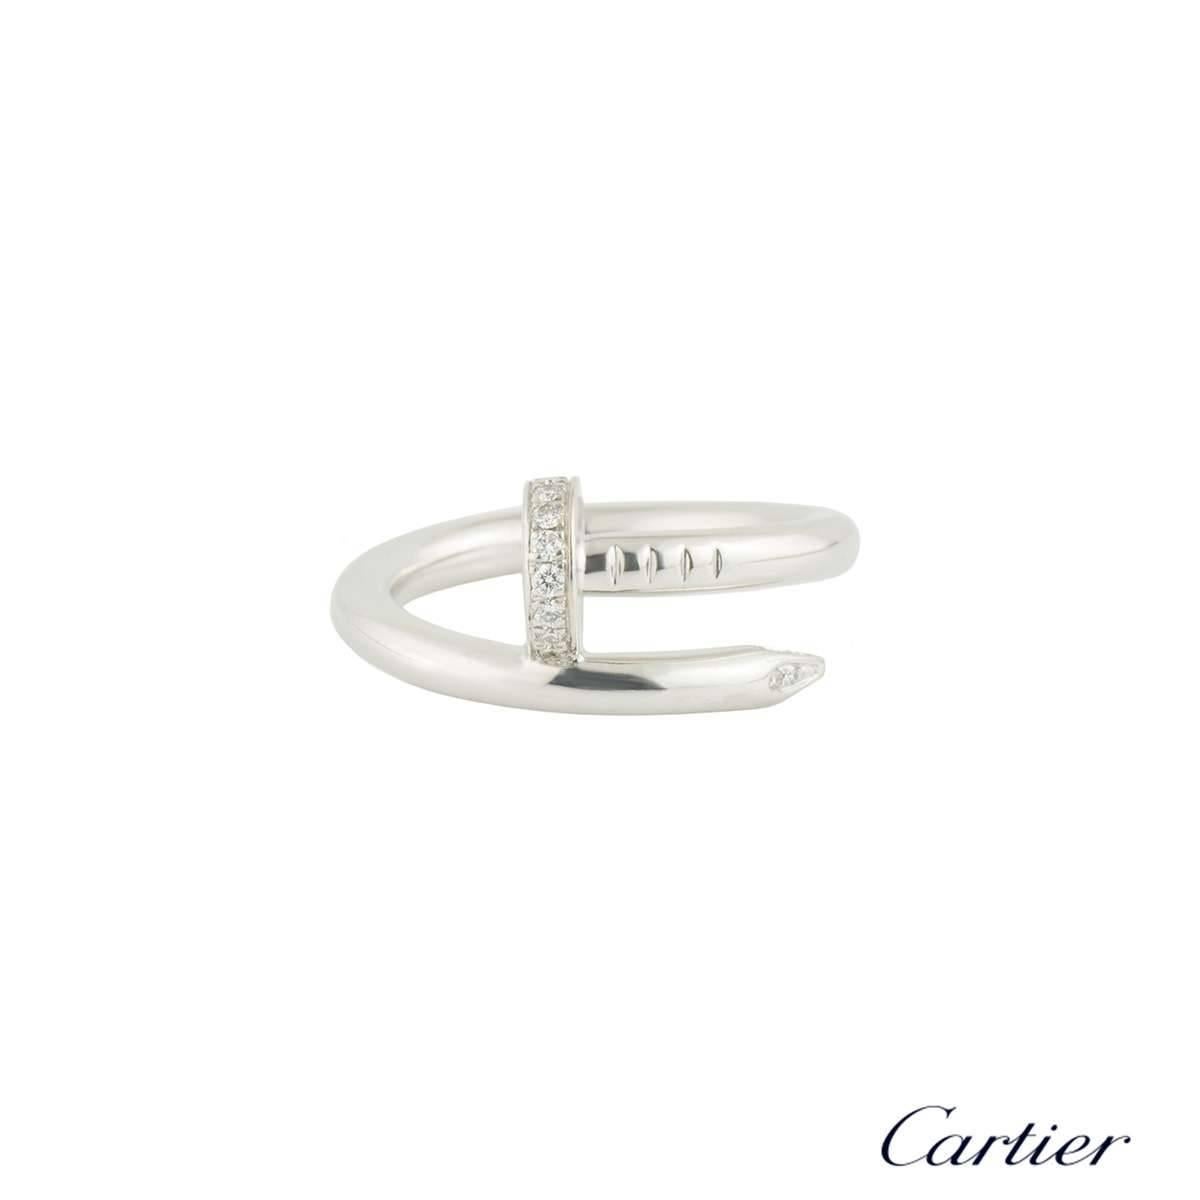 sell cartier ring london